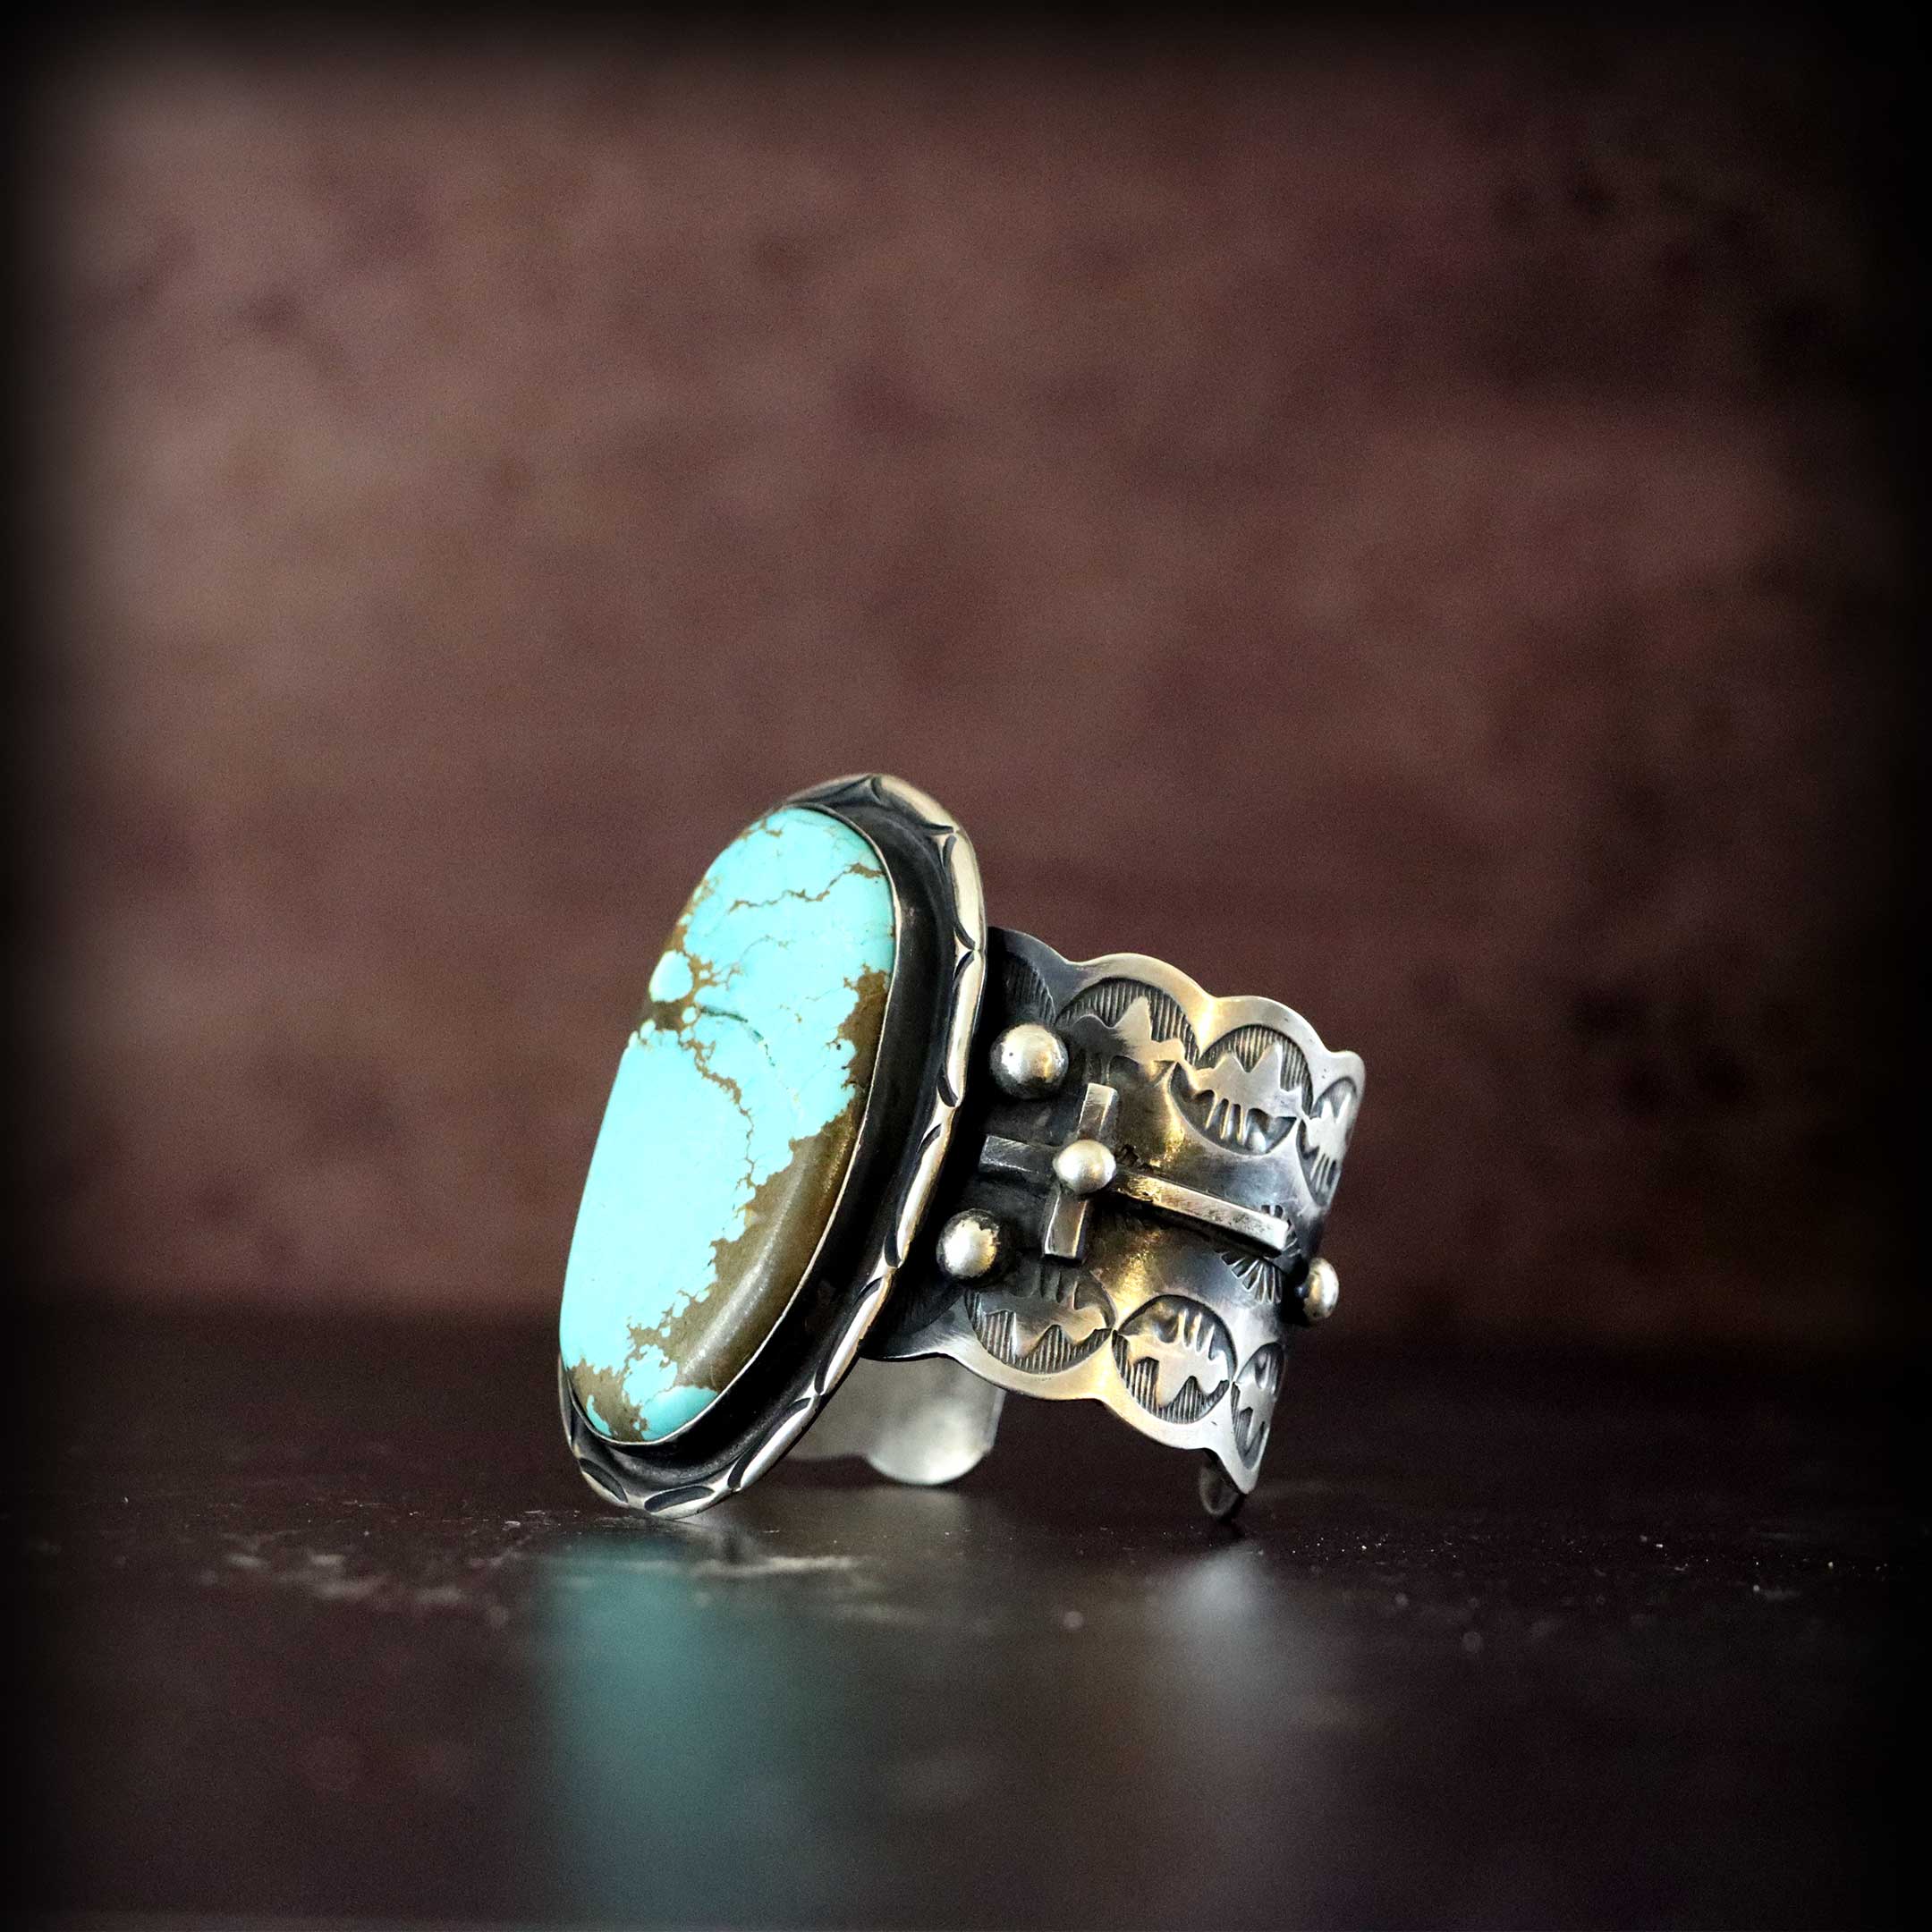 Large Stamped Cuff with Turquoise Cabochon by Chimney Butte